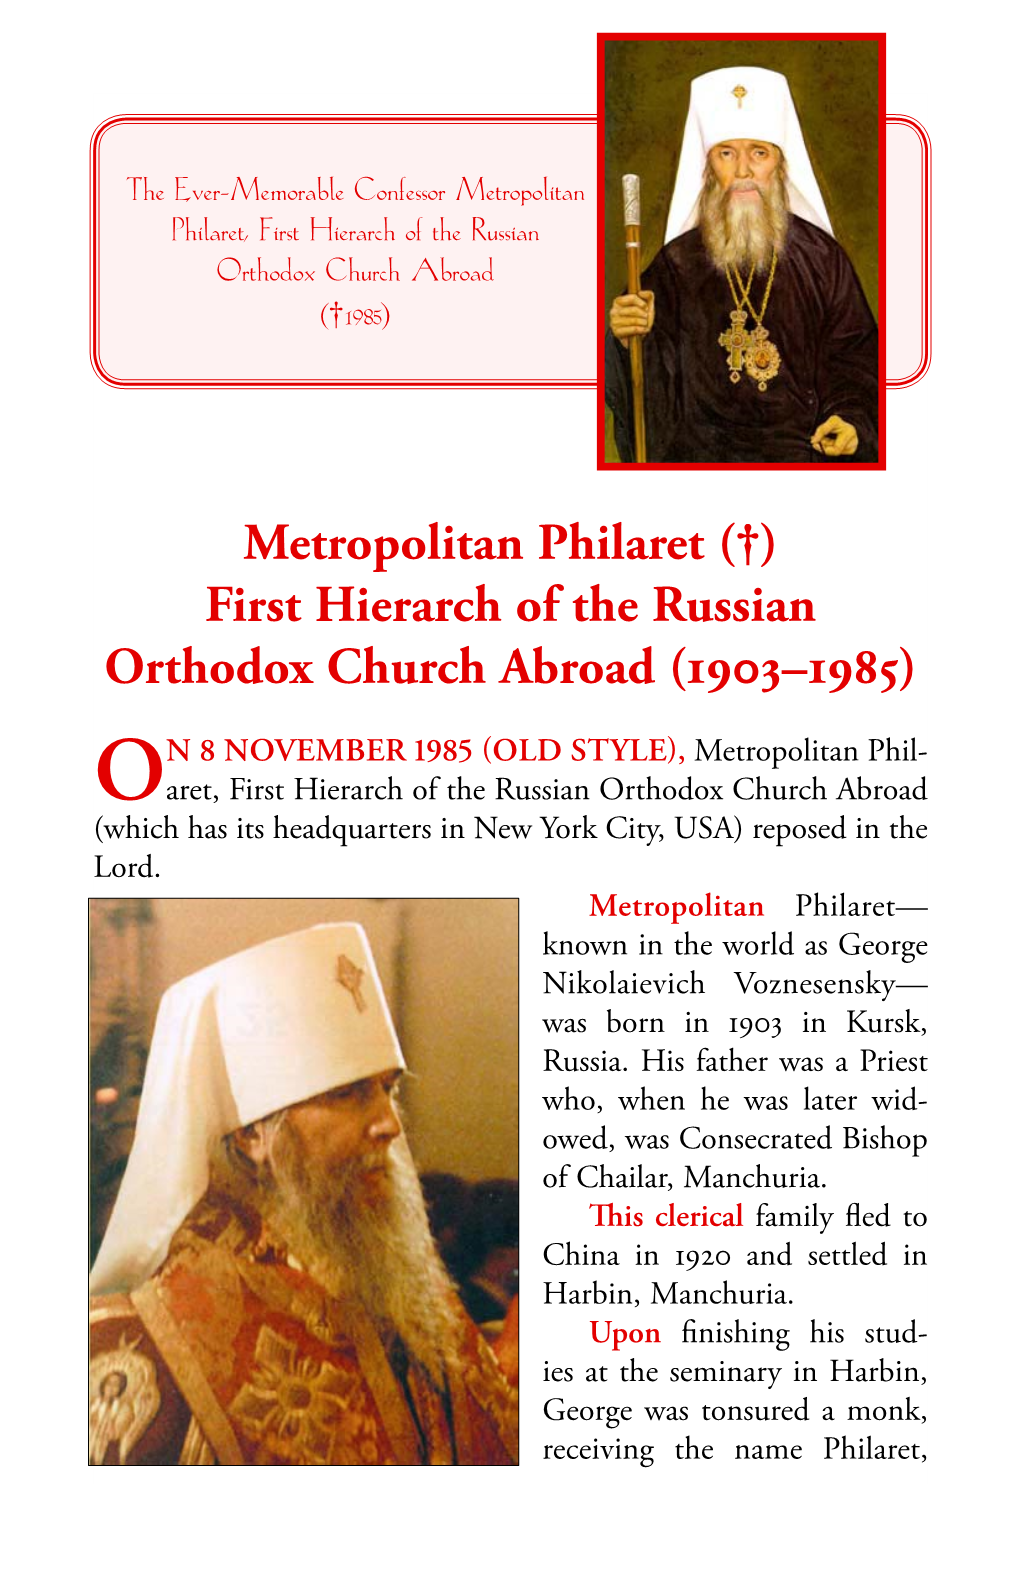 Metropolitan Philaret, First Hierarch of the Russian Orthodox Church Abroad (1903–1985)